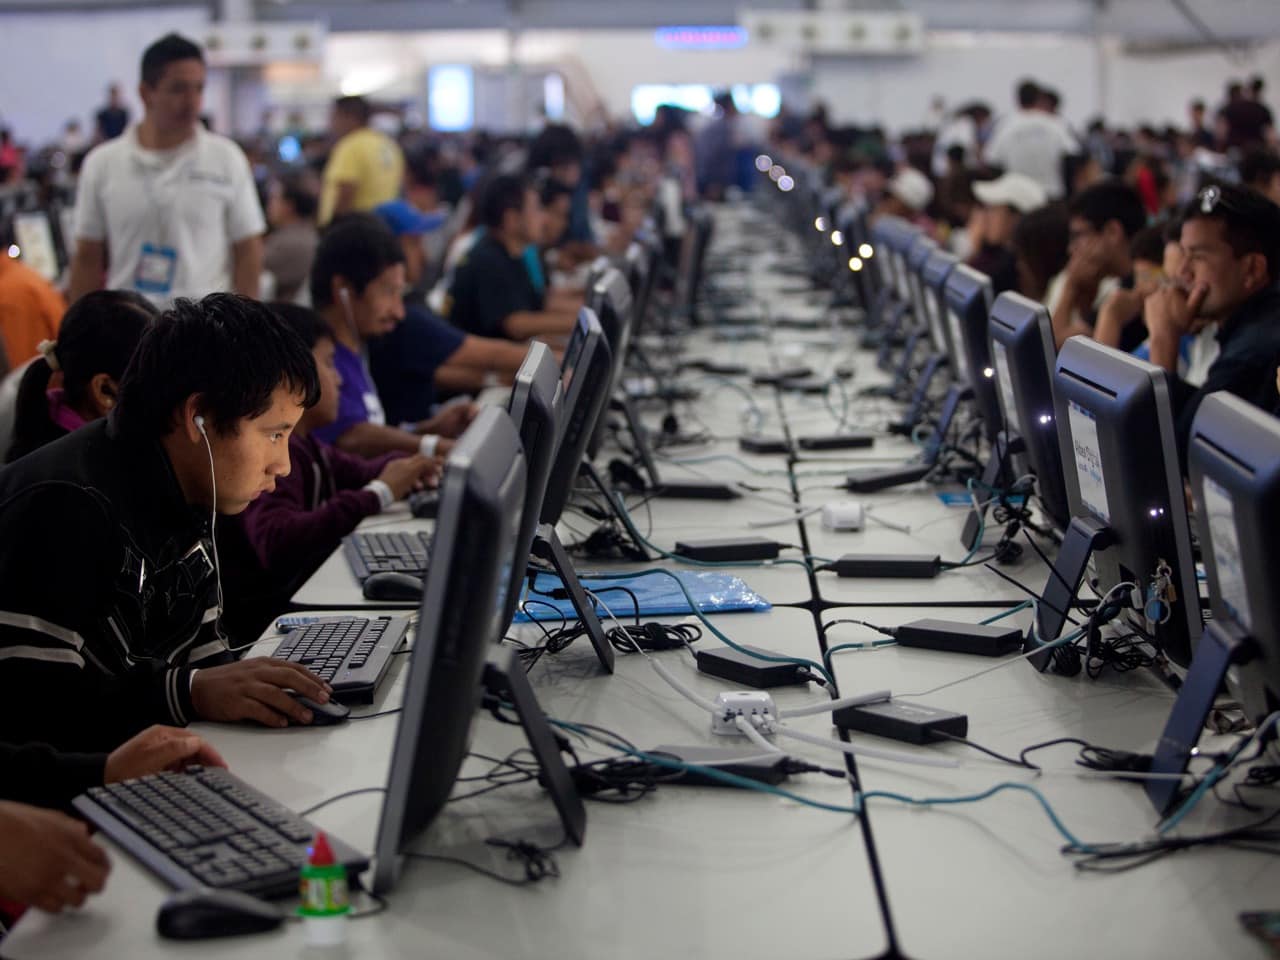 People of all ages surf the web at the Digital Village in Mexico City, 17 July 2015, AP Photo/Sofia Jaramillo